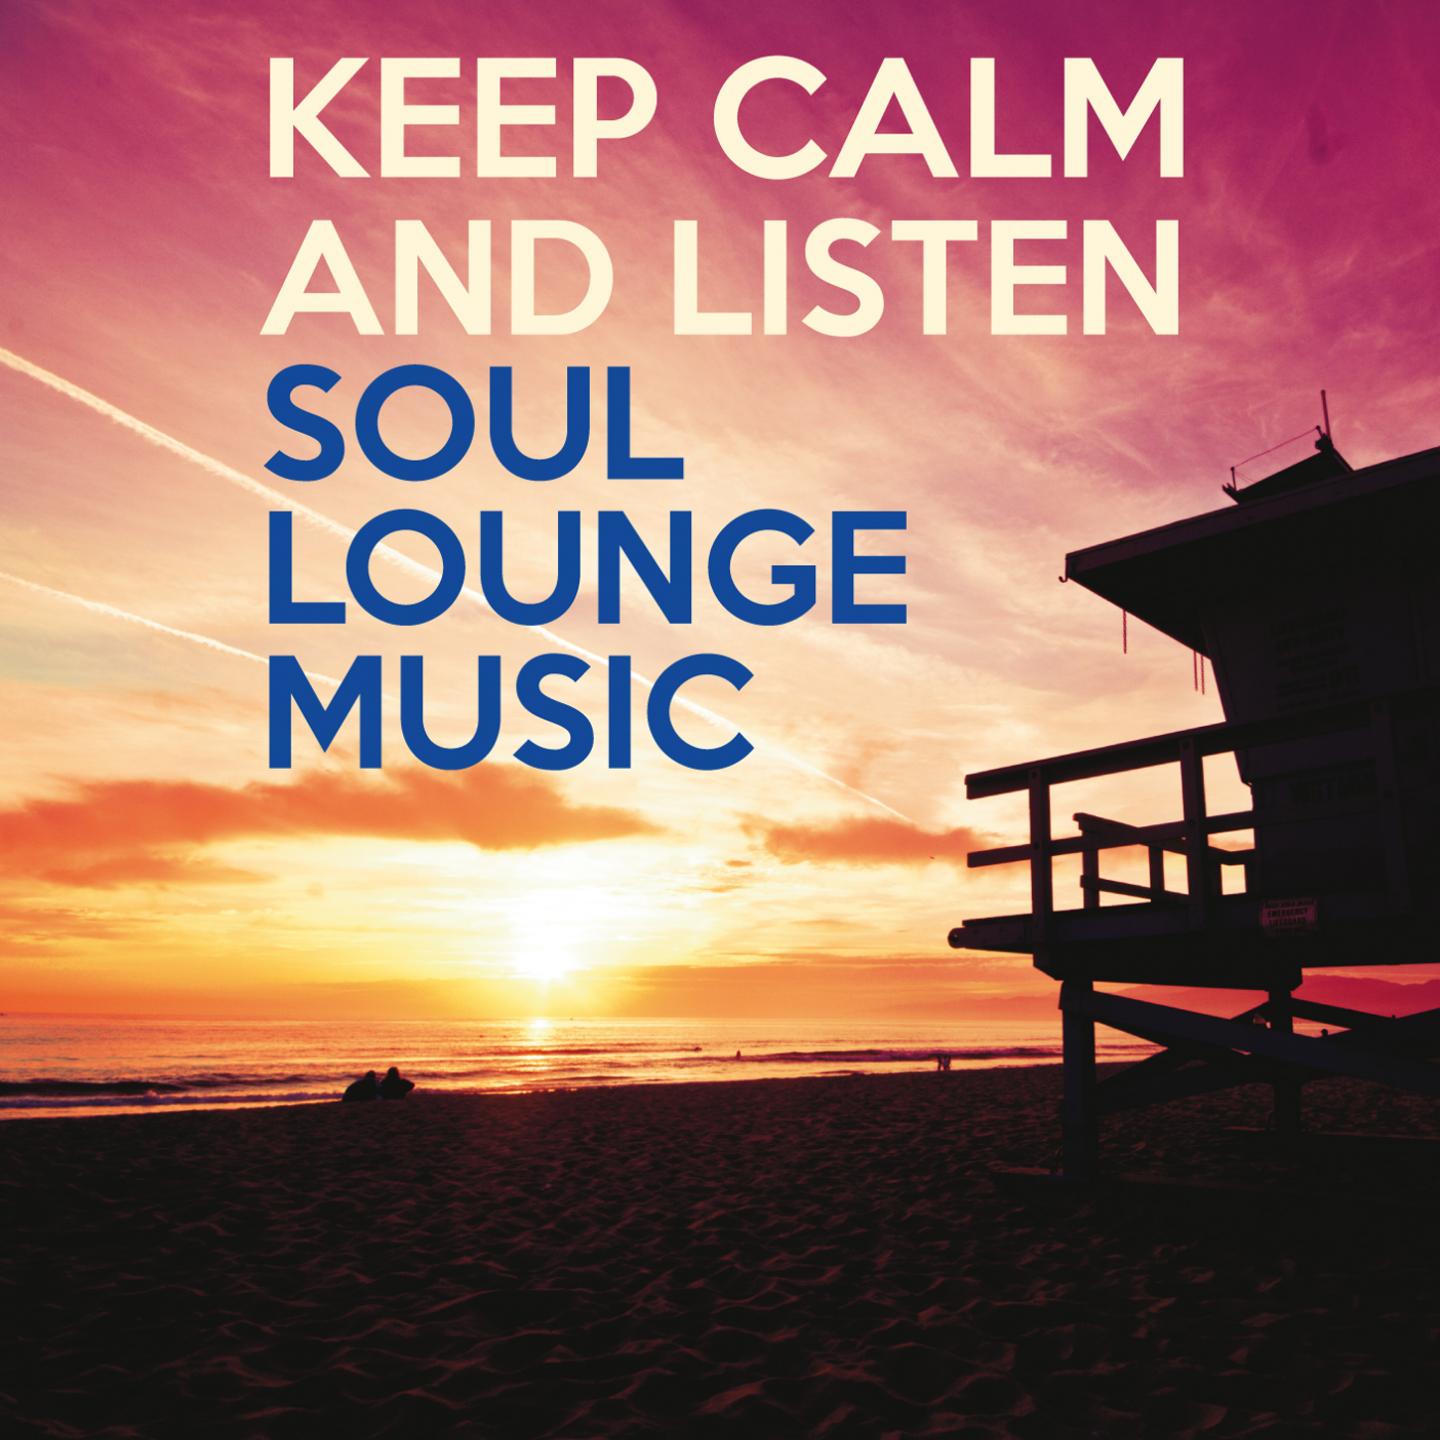 Keep Calm and Listen Soul Lounge Music